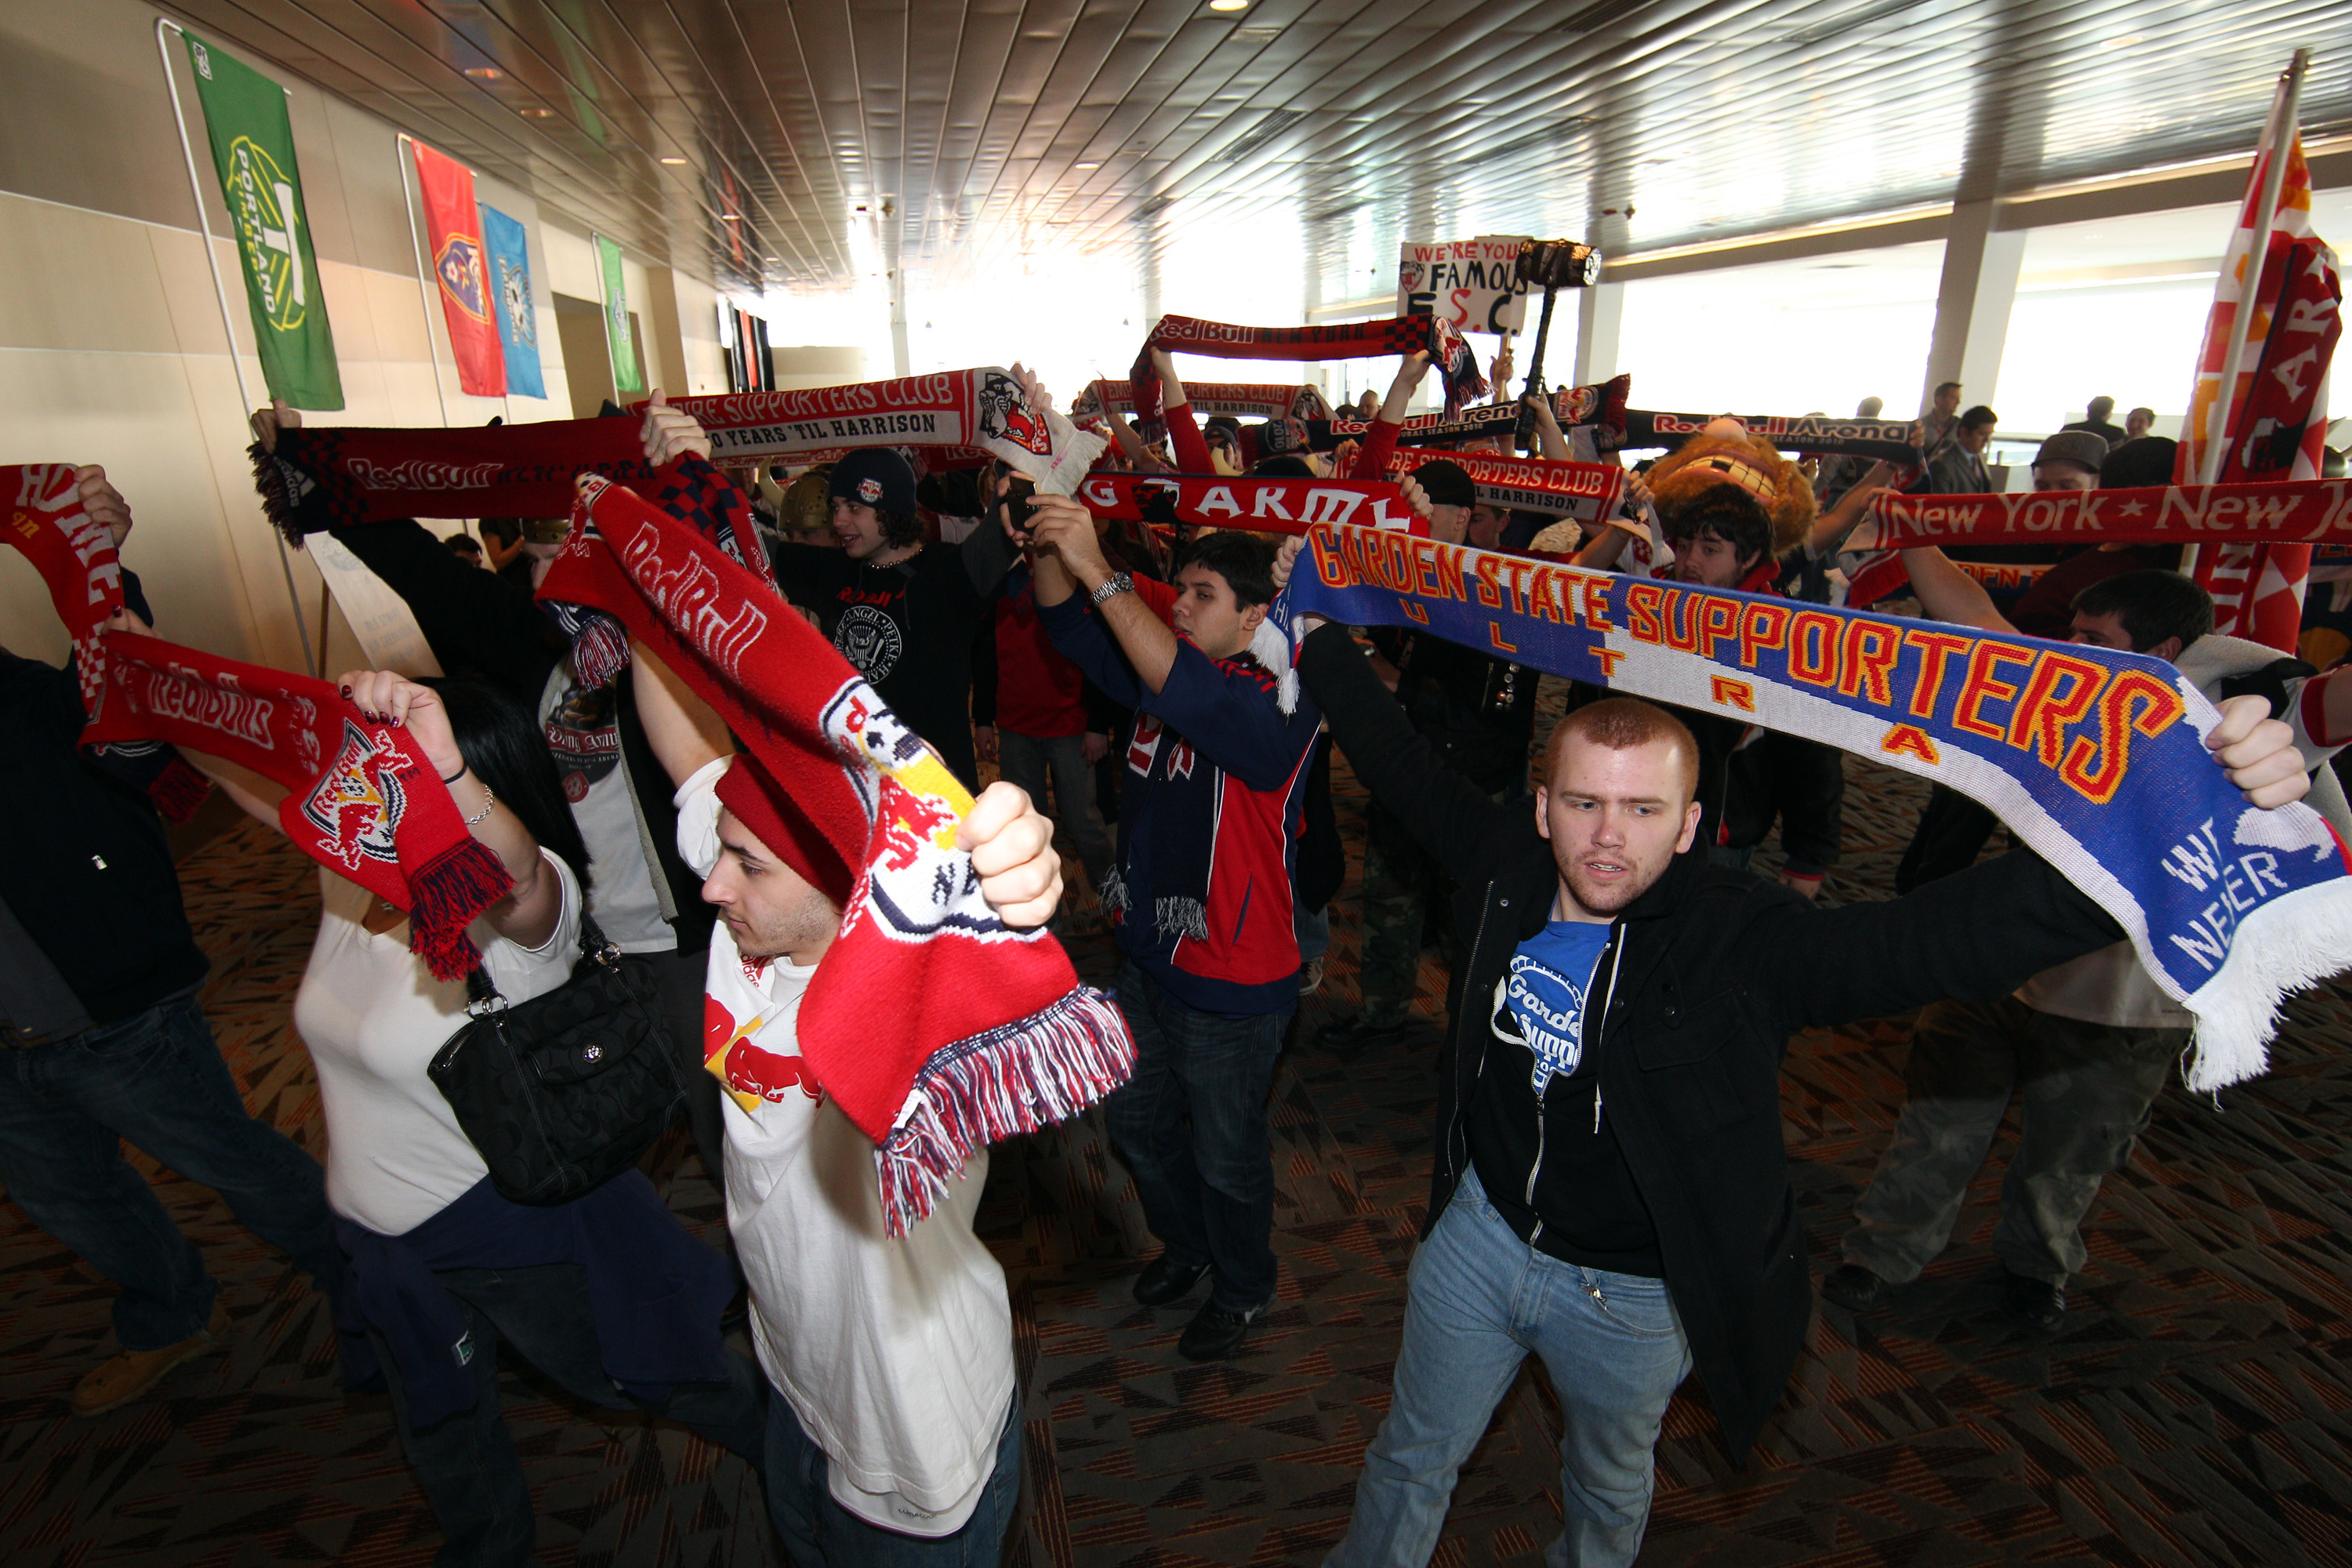 BALTIMORE, MD - JANUARY 13: Fans cheer during the 2011 MLS SuperDraft on January 13, 2011 at the Baltimore Convention Center in Baltimore, Maryland. (Photo by Ned Dishman/Getty Images)